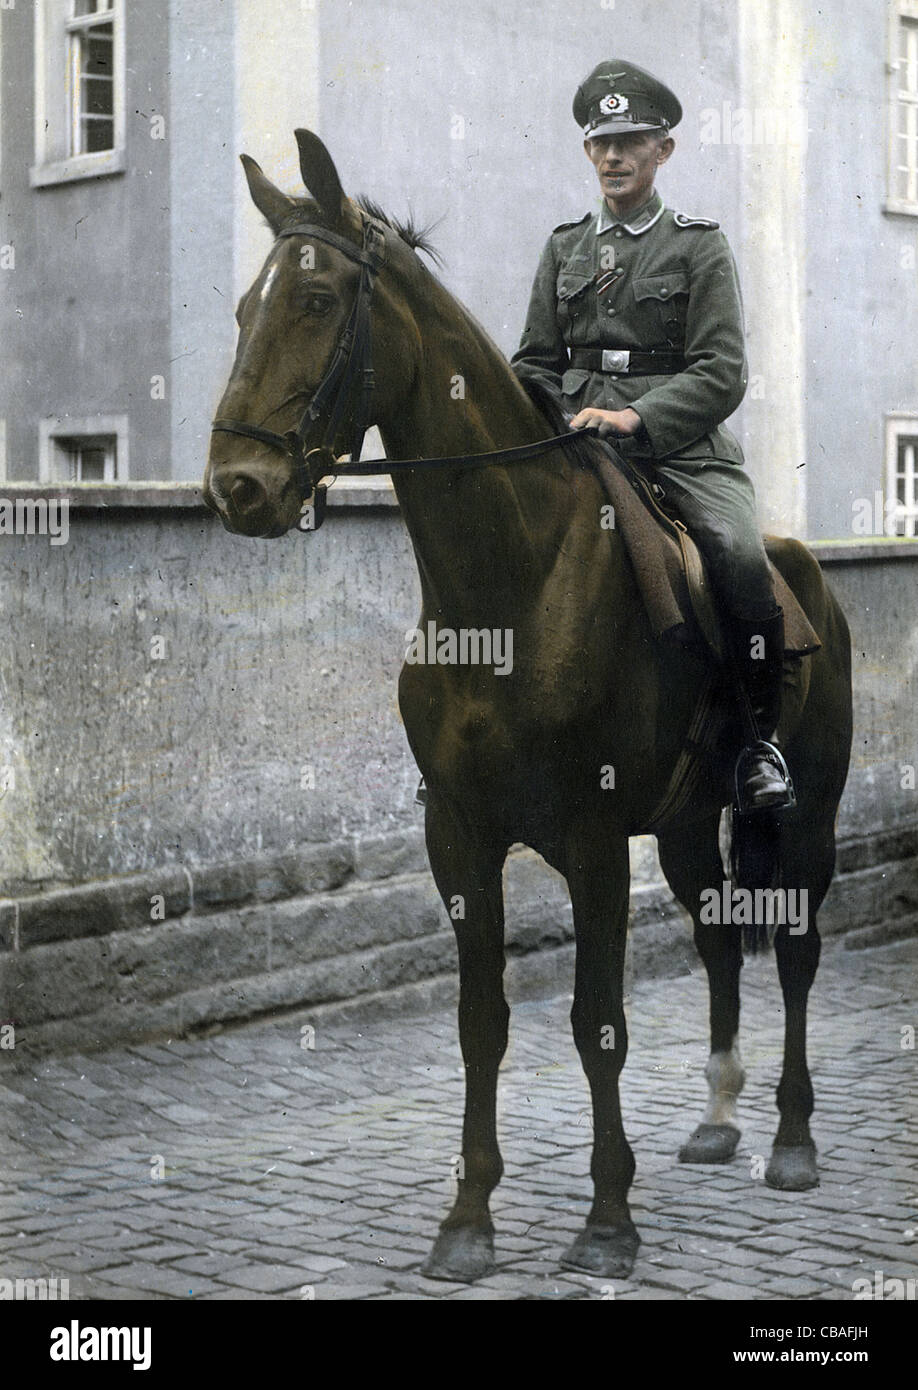 A German mounted officer of WW11. Color tinted image. Stock Photo